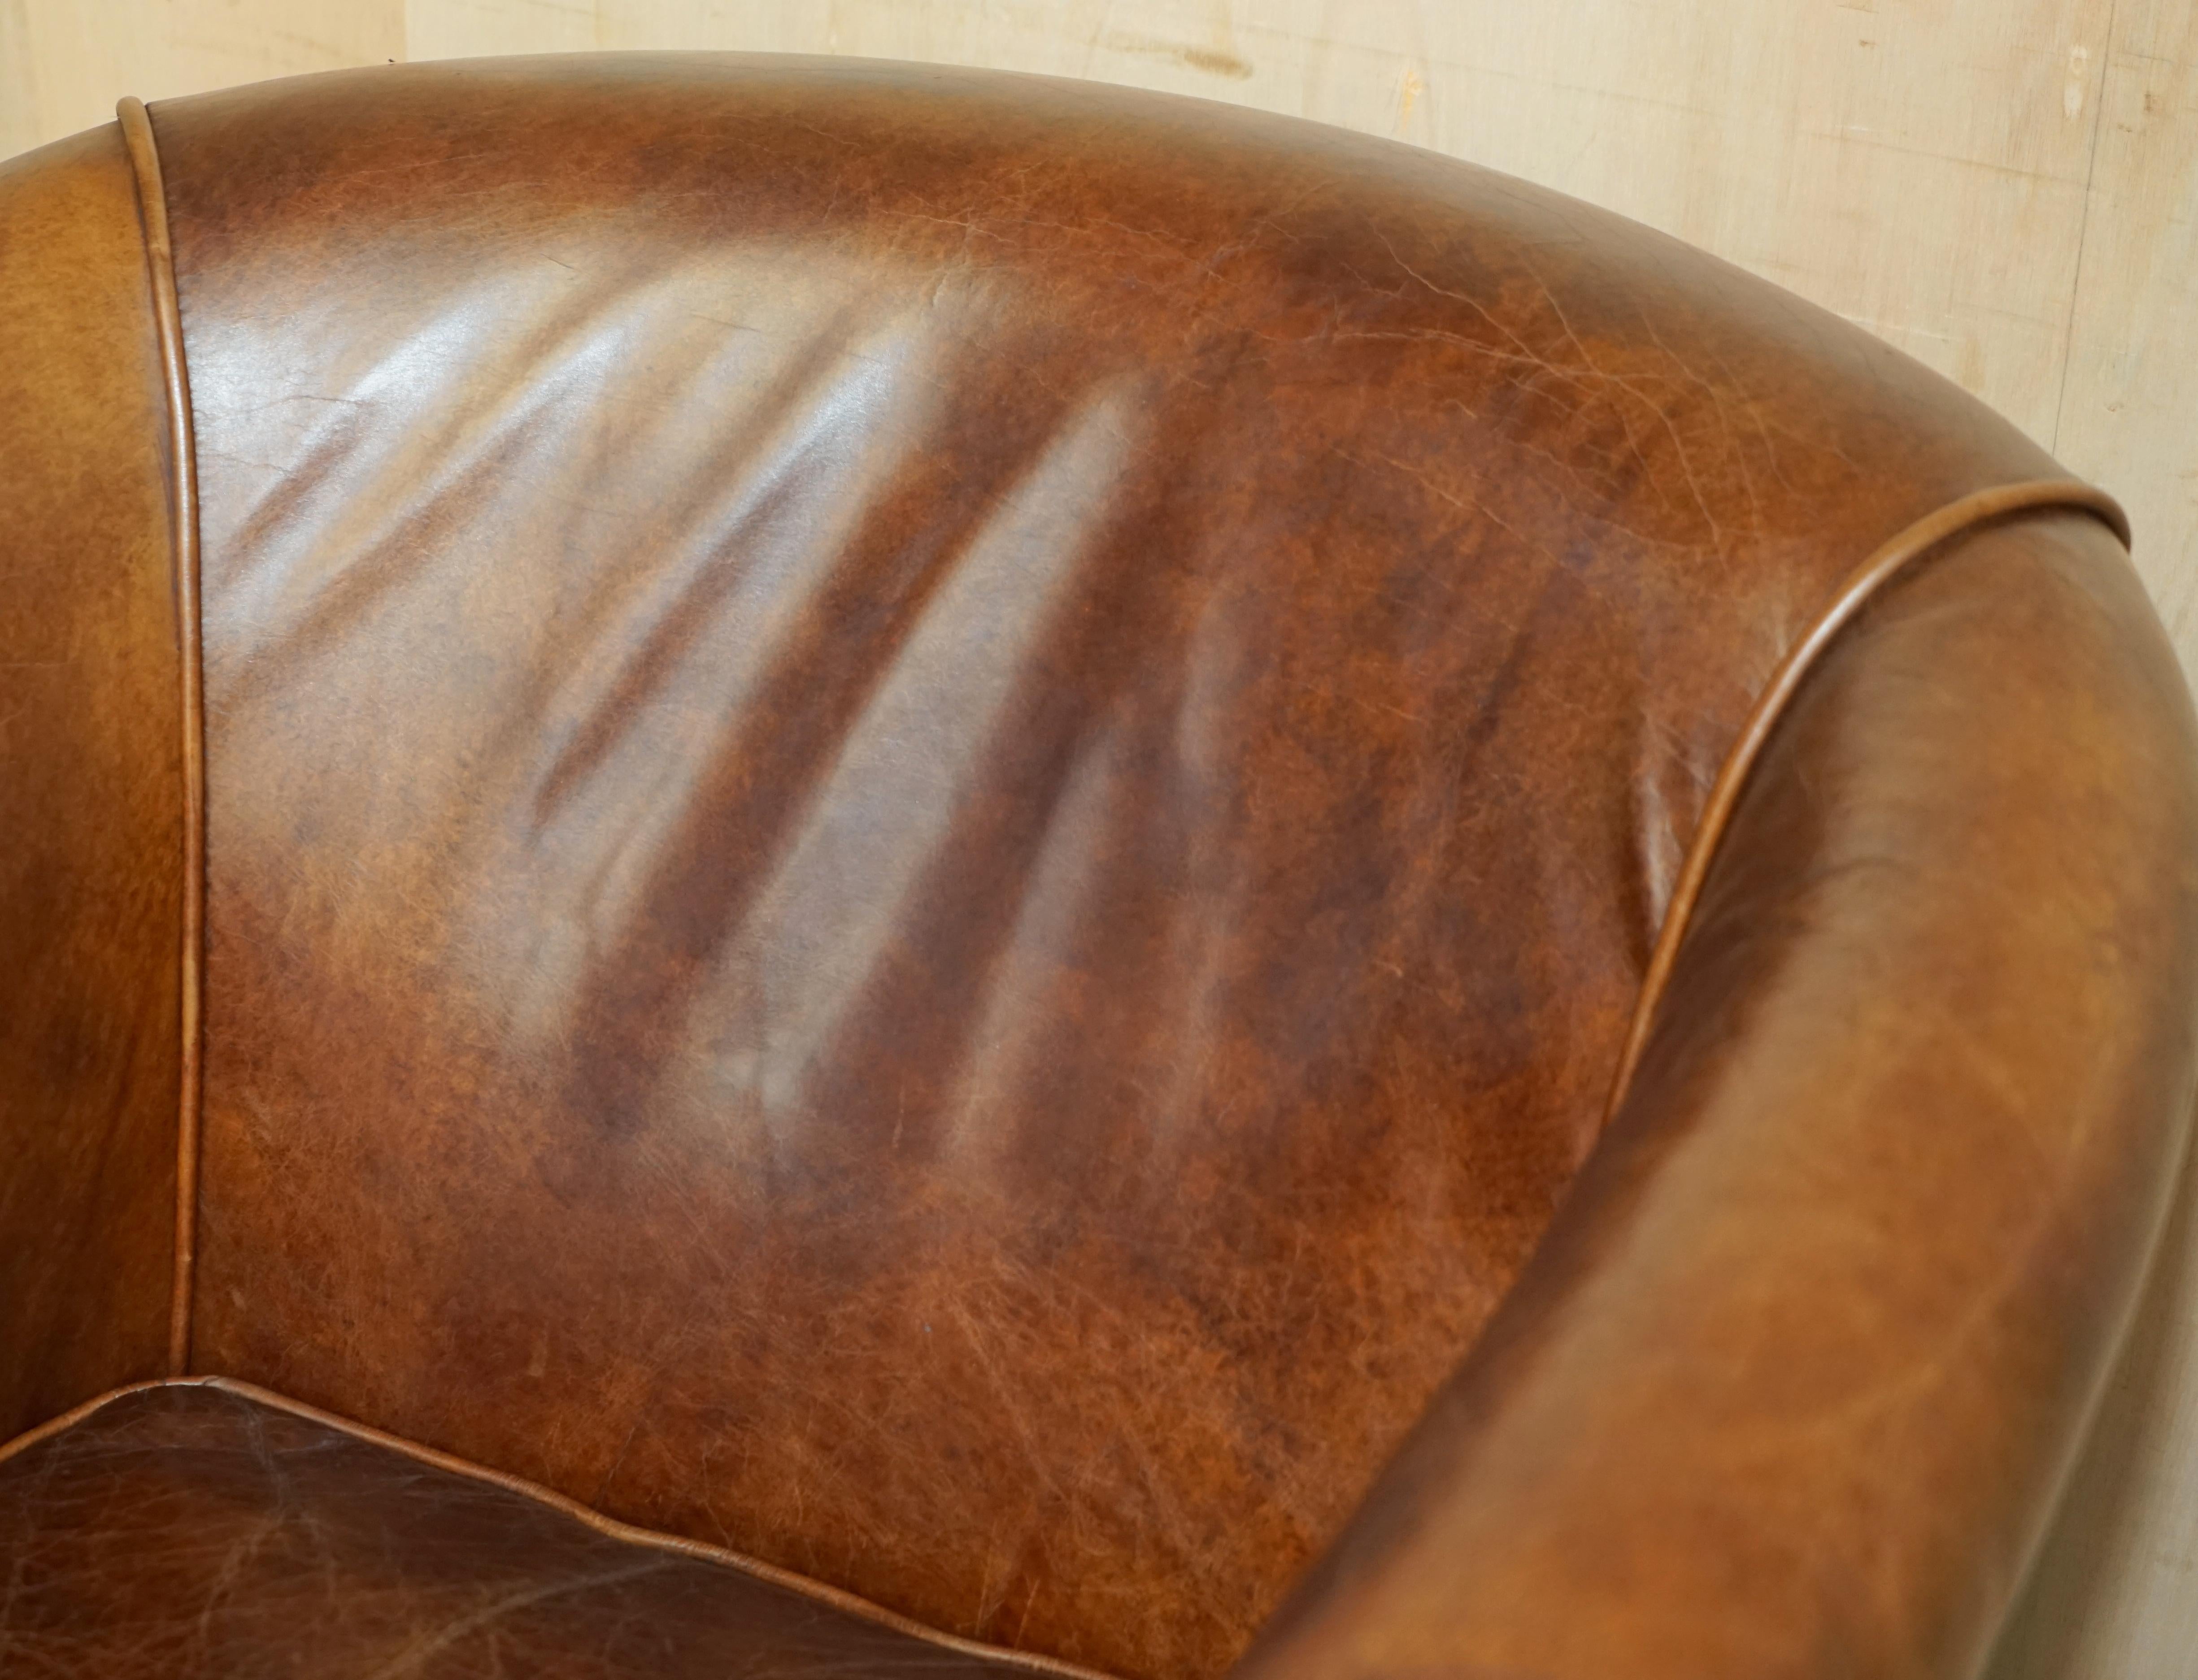 Art Deco AGED HERiTAGE BROWN LEATHER BIKER TAN CLUB TUB ARMCHAIR MUST SEE LOVELY PATINa!! For Sale